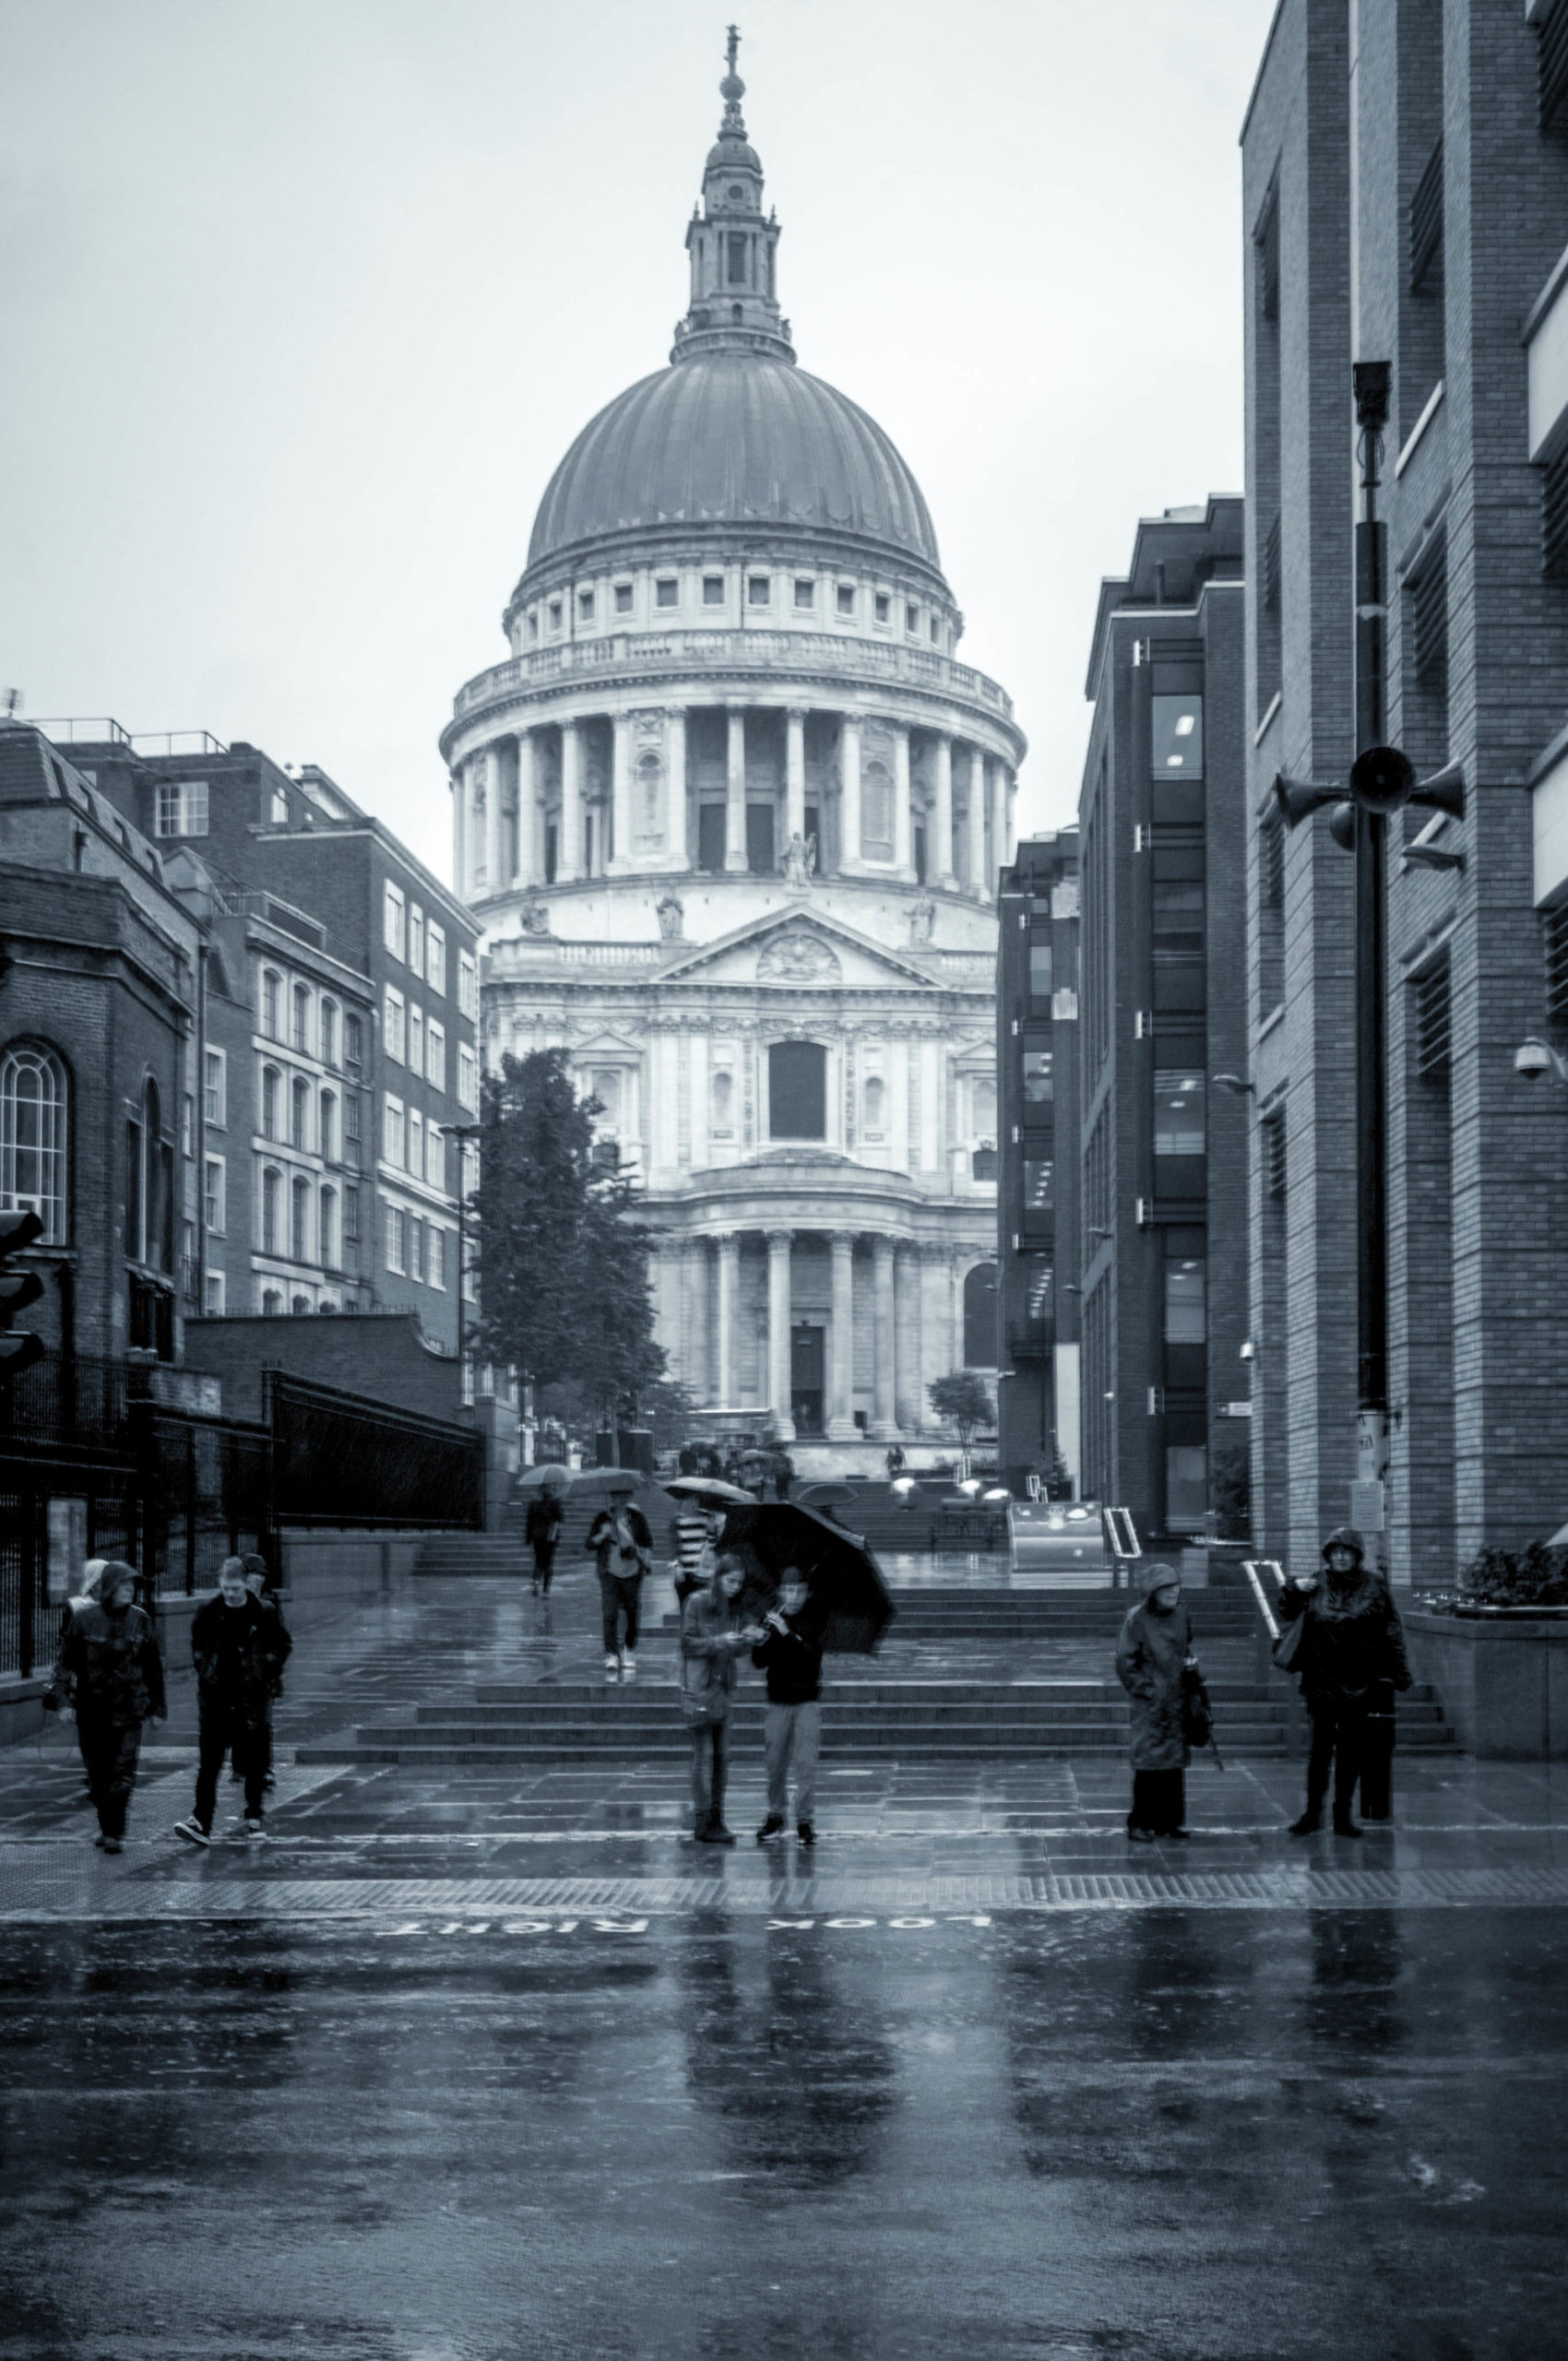 St Pauls cathedral | London photographer, architectural photographer